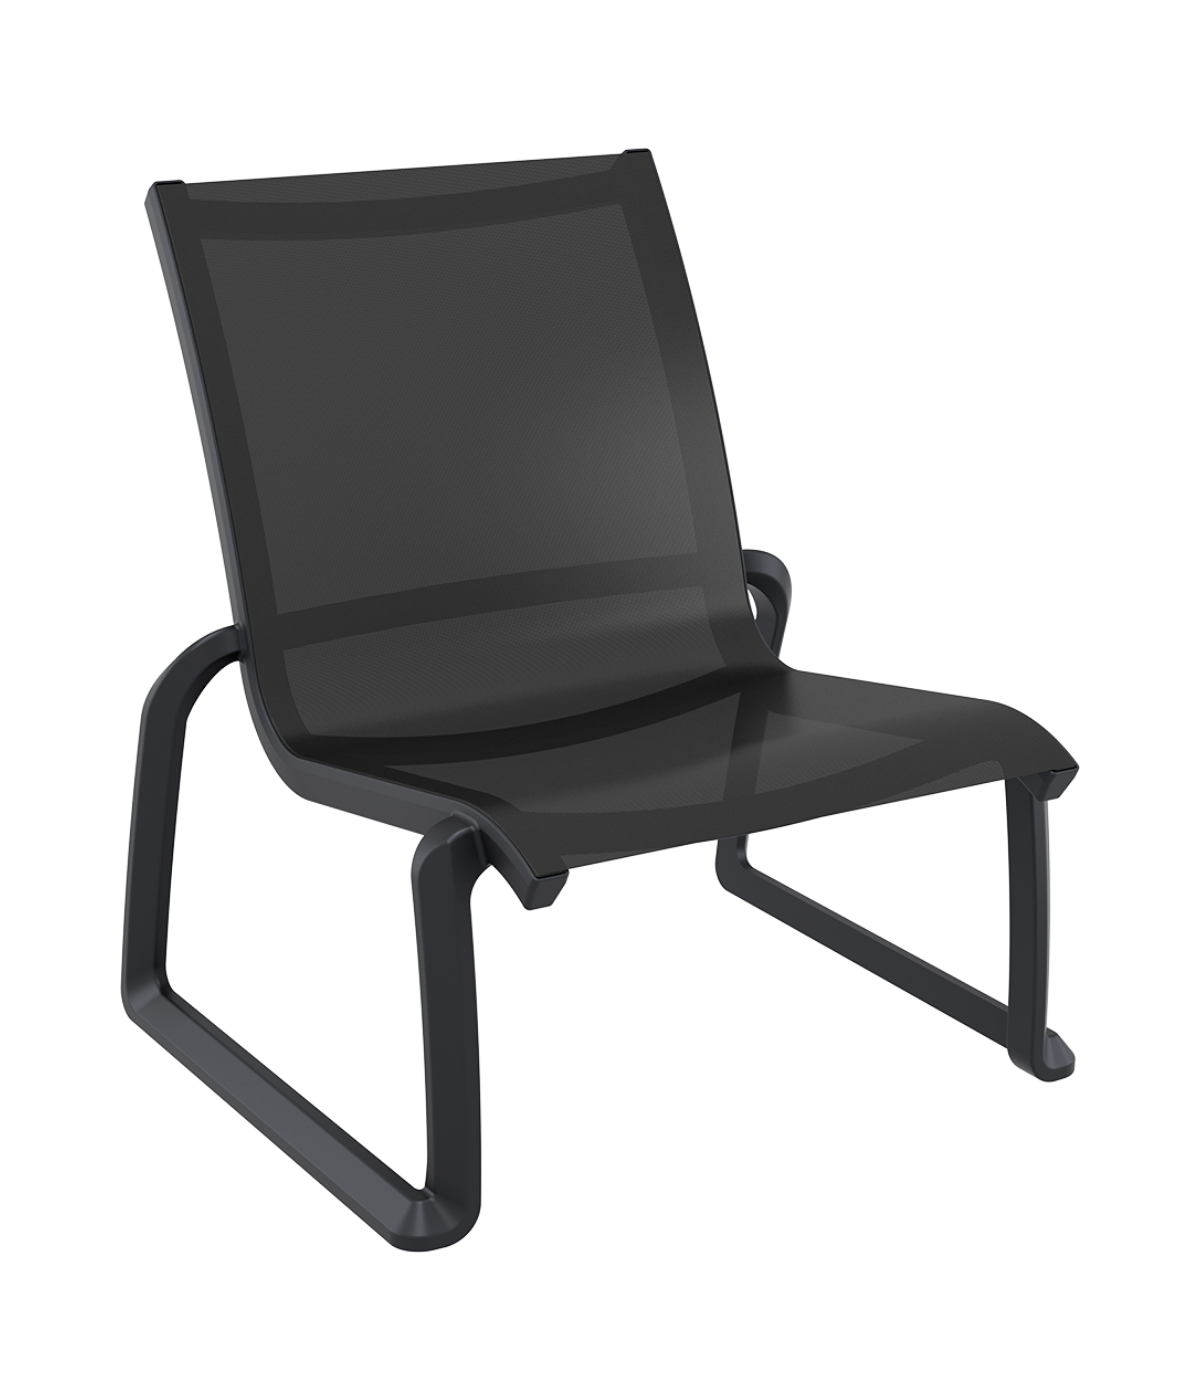 Pacific Lounge Chair